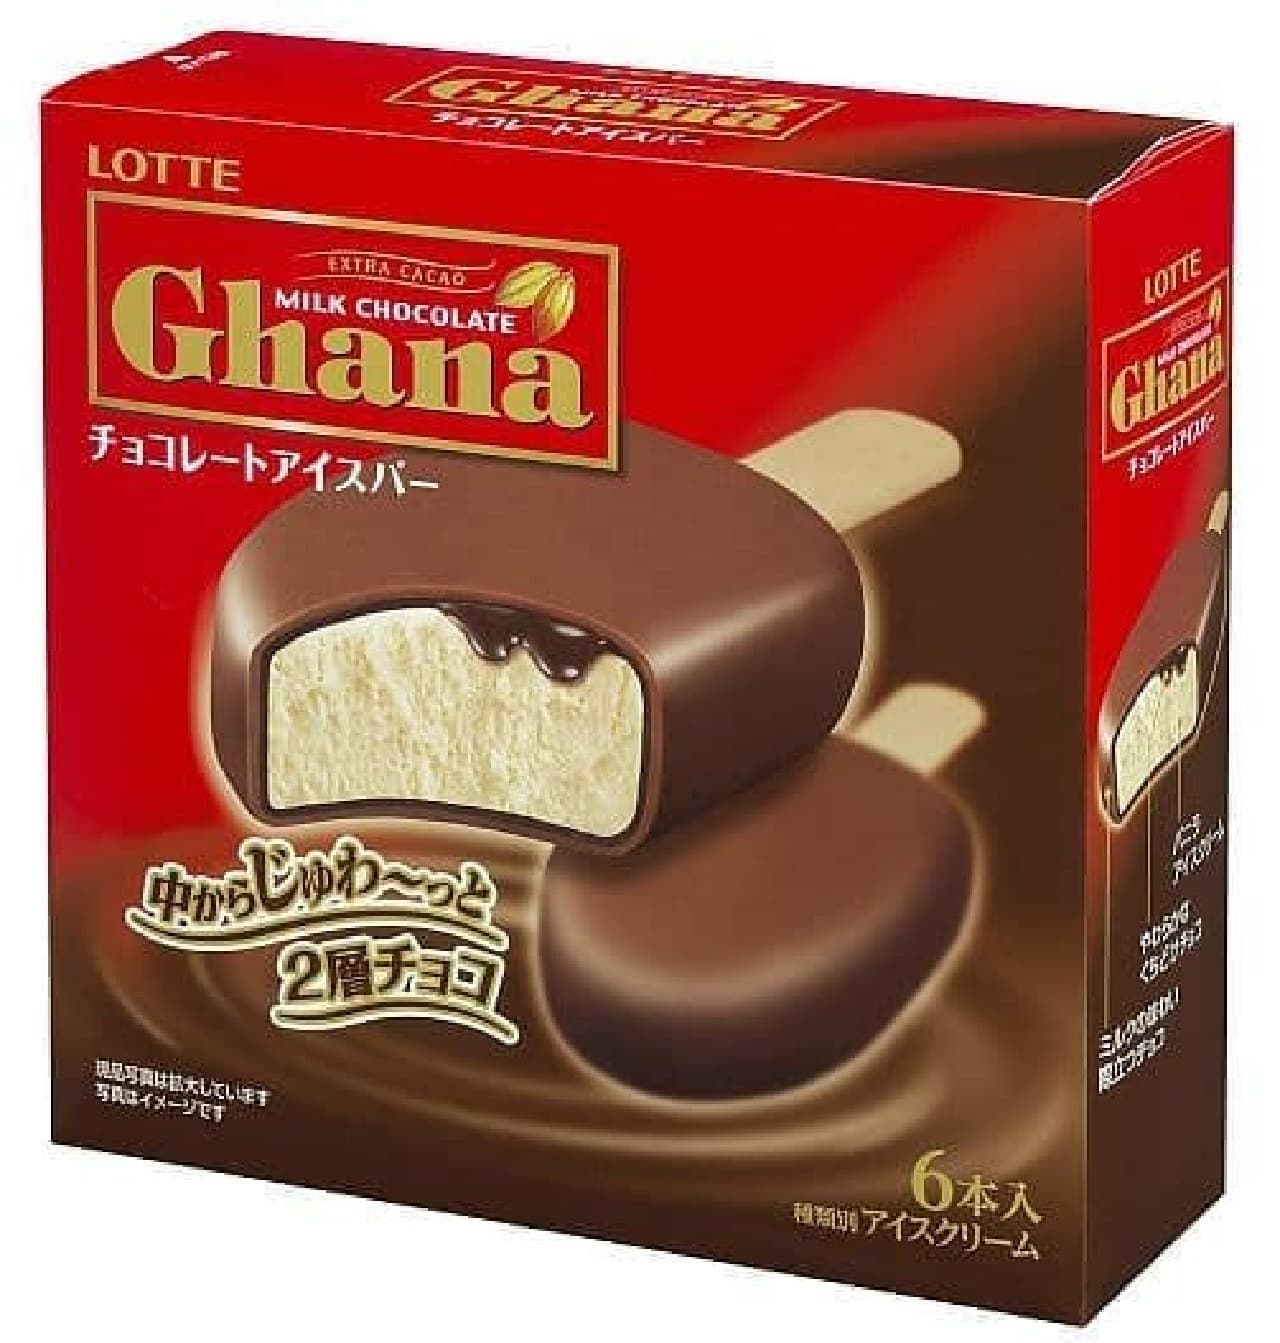 6 pieces of "Ghana Multi Chocolate Ice Bar" that everyone can eat